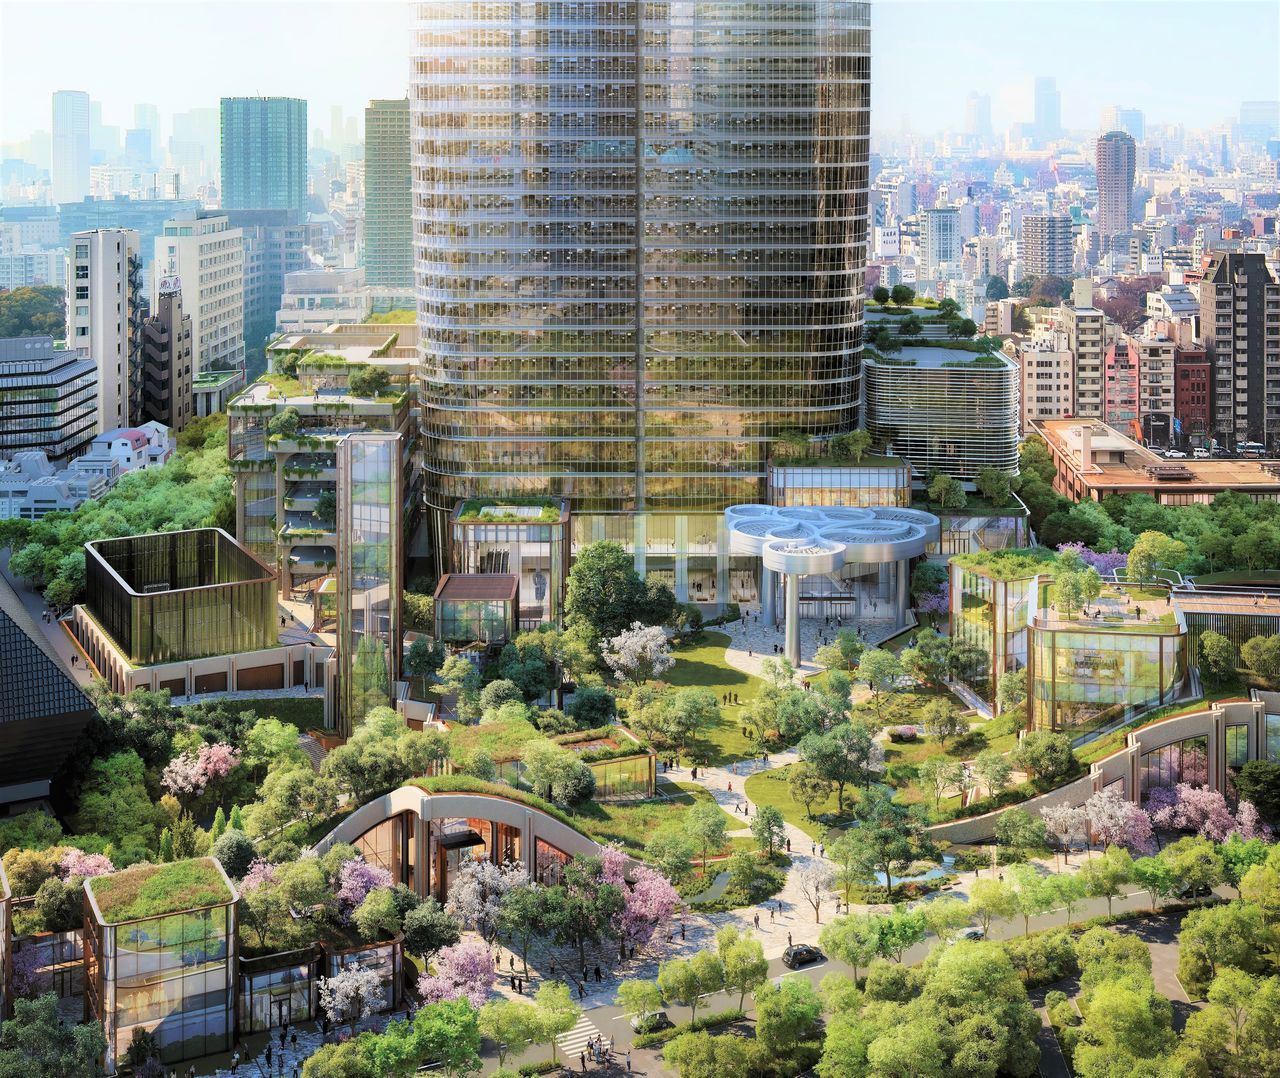 The development takes advantage of the varied topography of the site by growing some 320 plant species on the grounds and the rooftops of low-rise buildings. (© DBOX for Mori Building/Azabudai Hills)